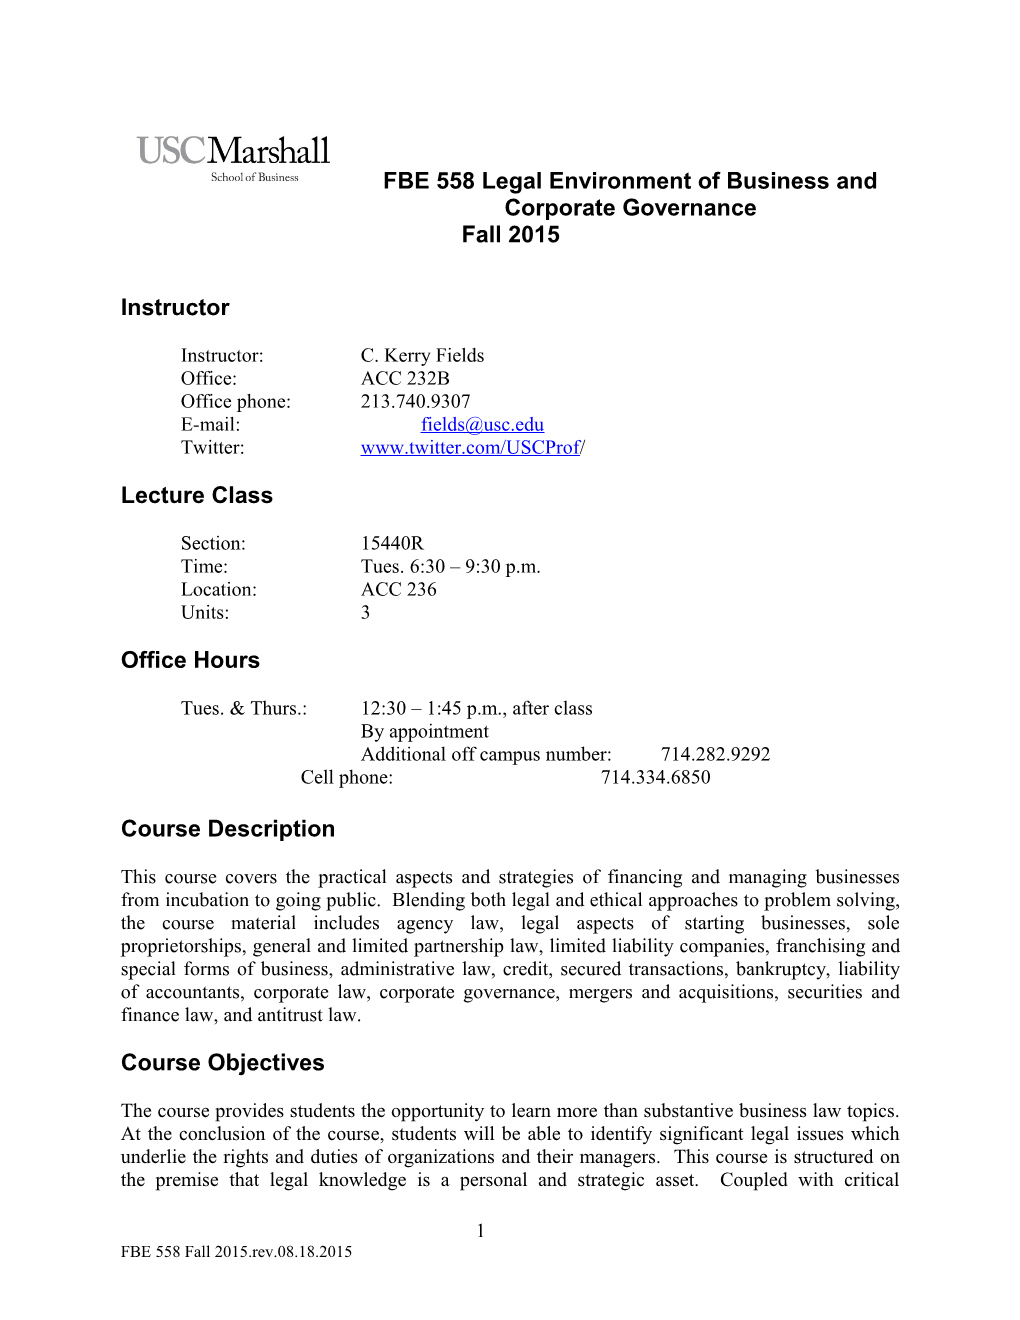 FBE 558 Legal Environment of Business and Corporate Governance